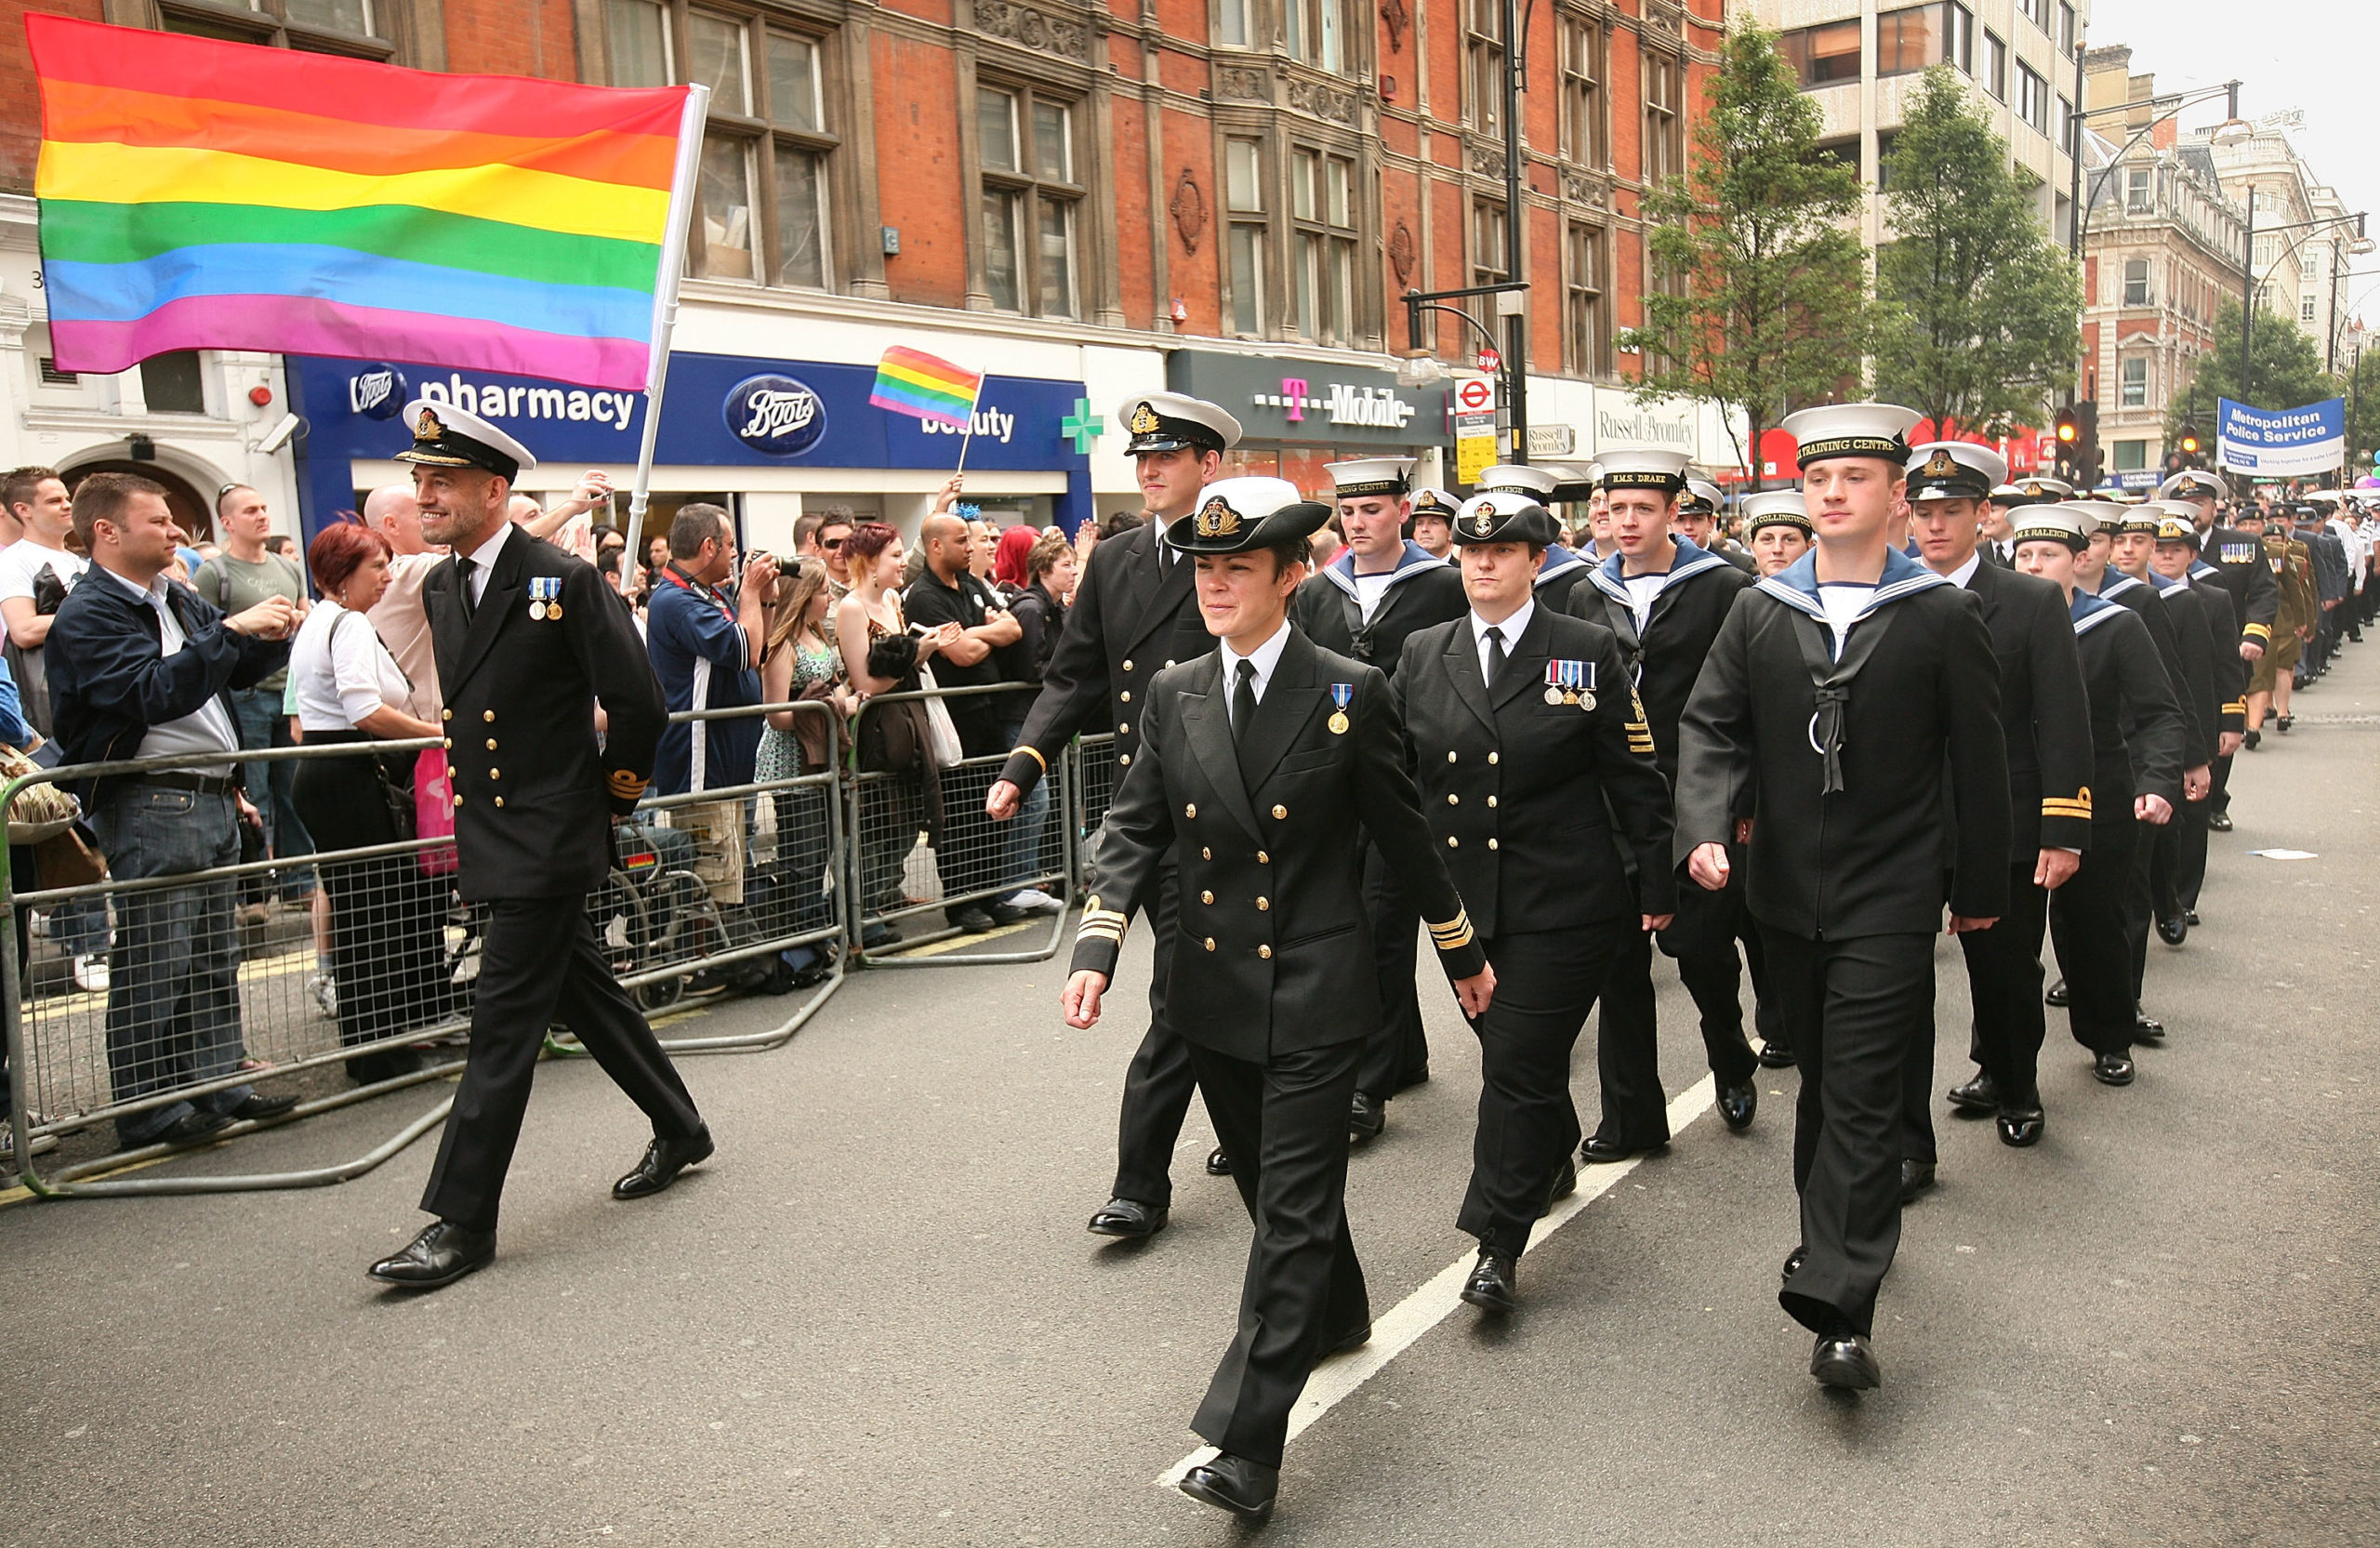 Ministry of Defence slammed for hypocrisy over LGBT inclusion job